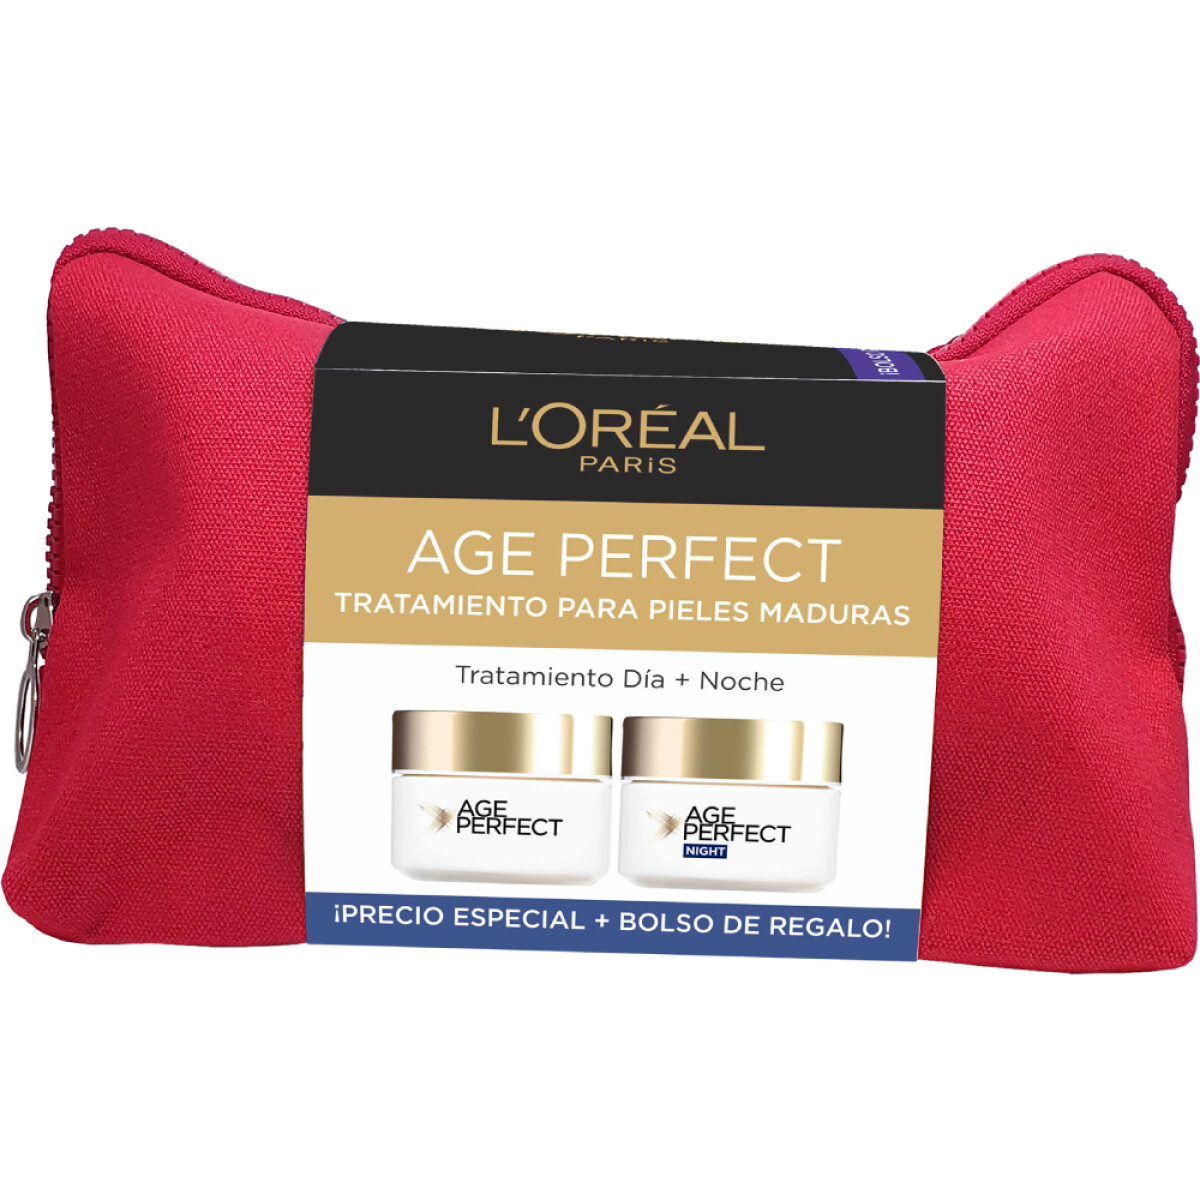 Pack L'oreal Age Perfect Gama Blanca Día + Noche - 001 